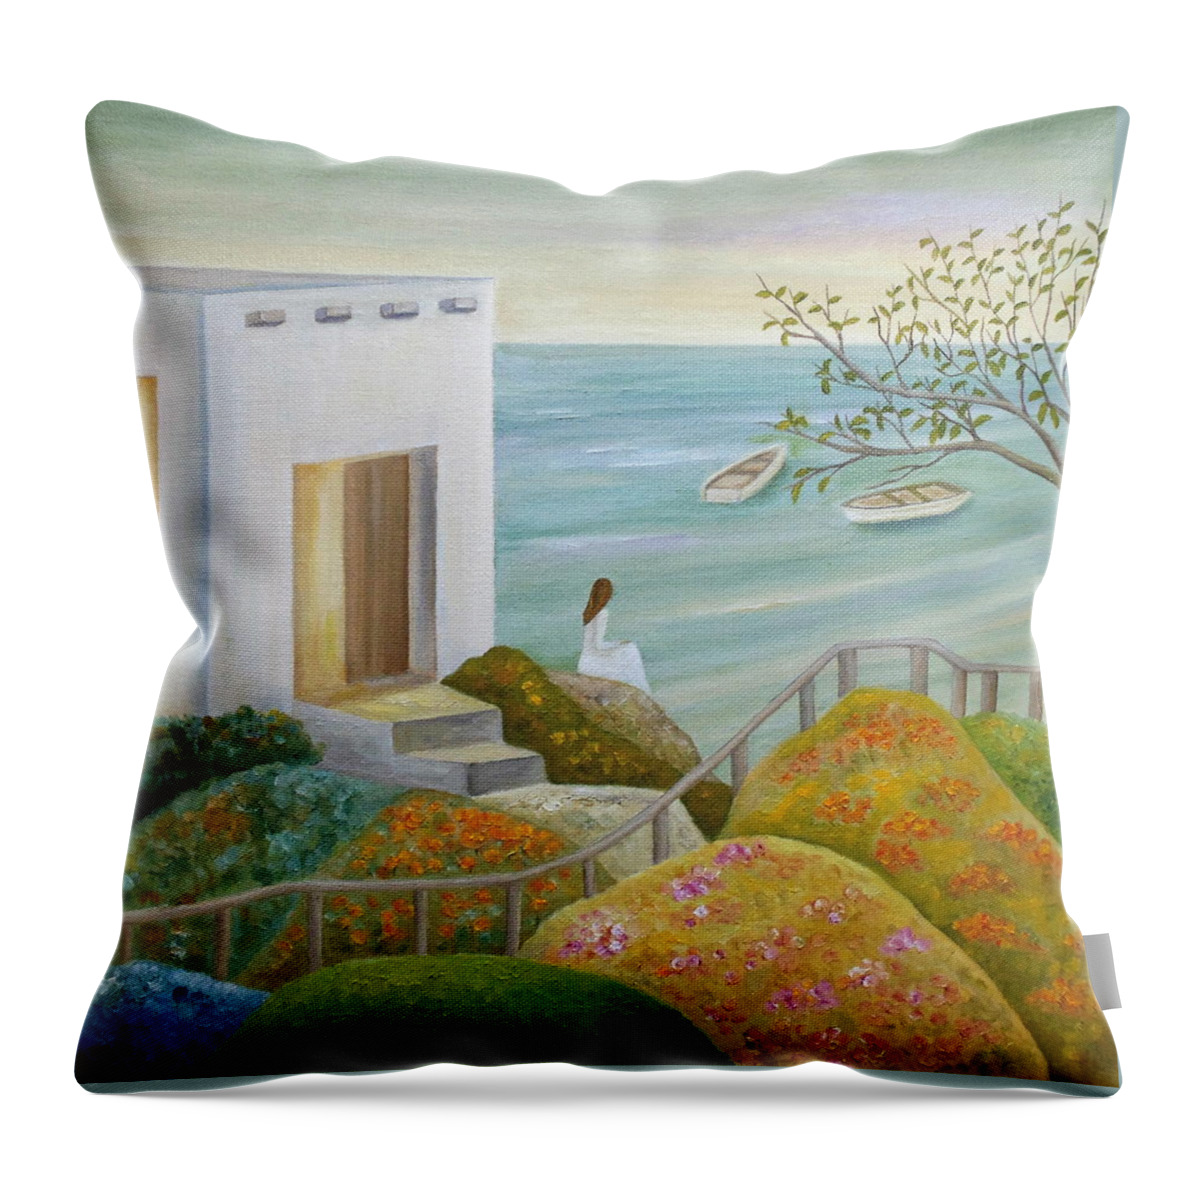 Marine. Marine Art Throw Pillow featuring the painting Sat Still At The Brink by Angeles M Pomata